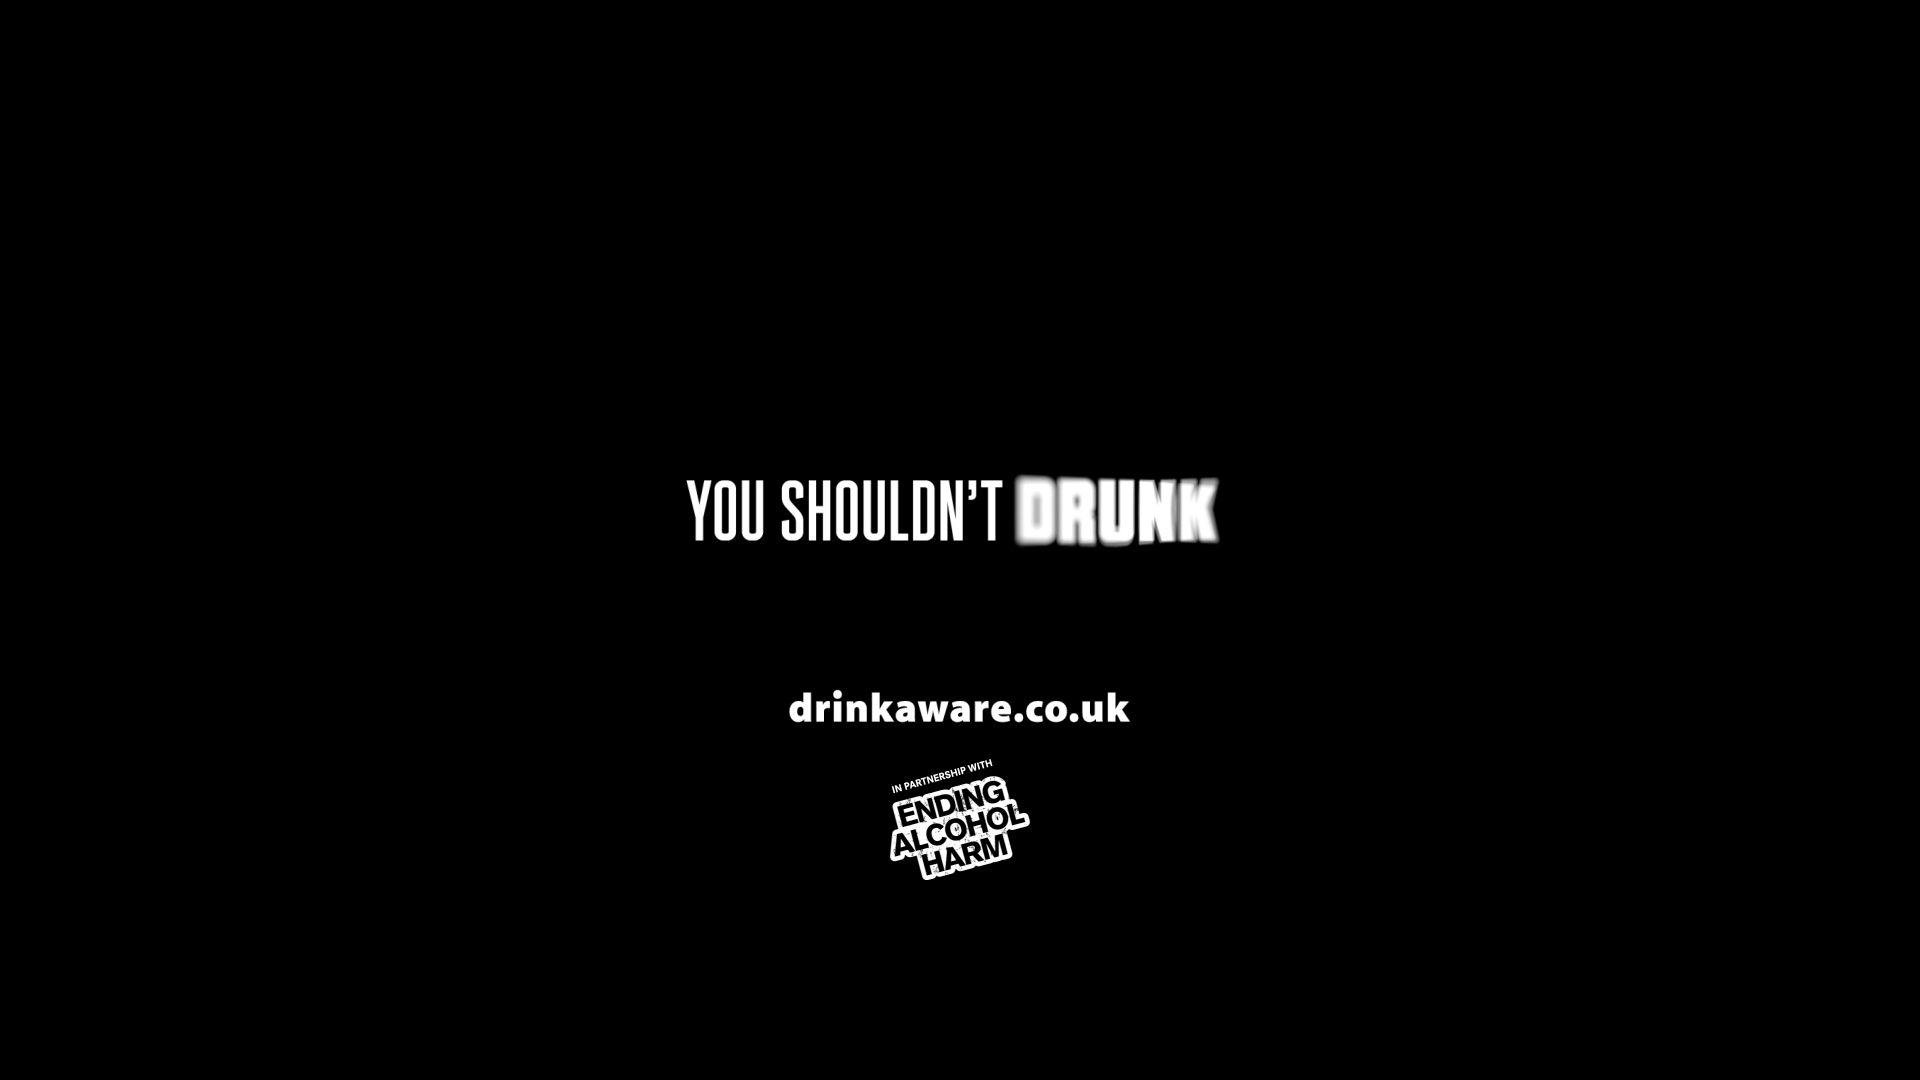 Drink_Aware_40_Showreel_Mix_Full_Scale_011014 (0.00.38.05)